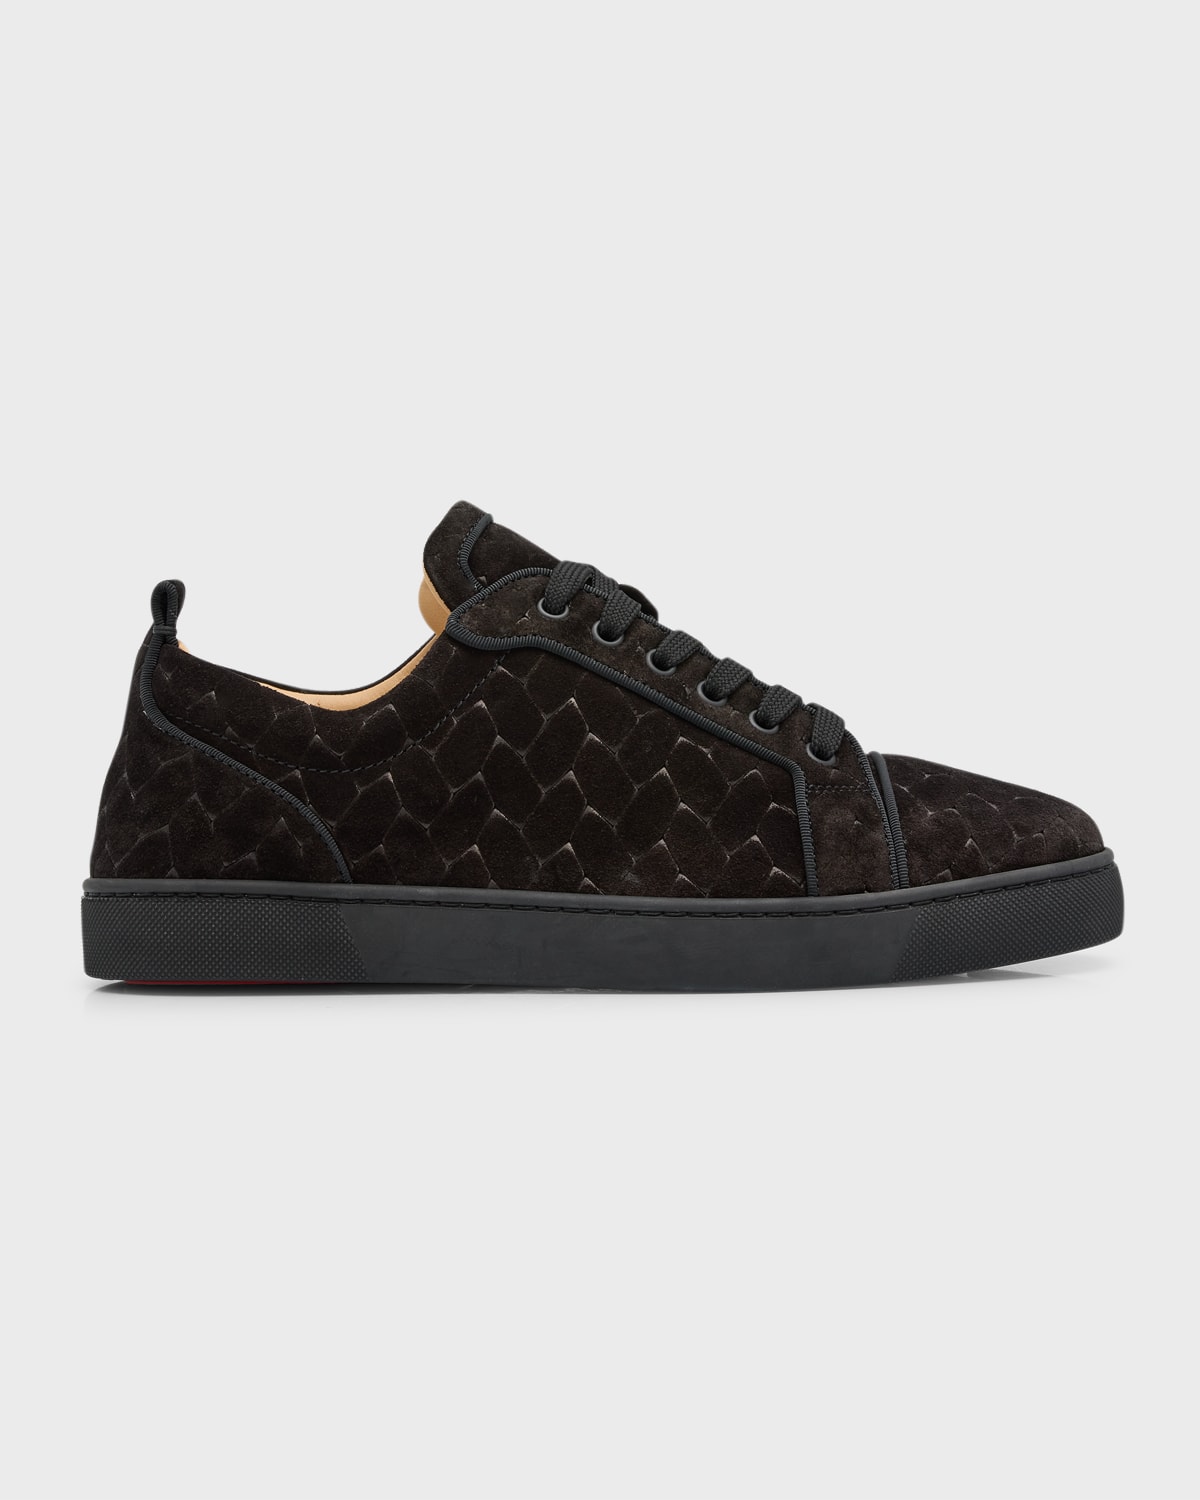 CHRISTIAN LOUBOUTIN MEN'S LOUIS JUNIOR BRAIDED LEATHER LOW-TOP SNEAKERS